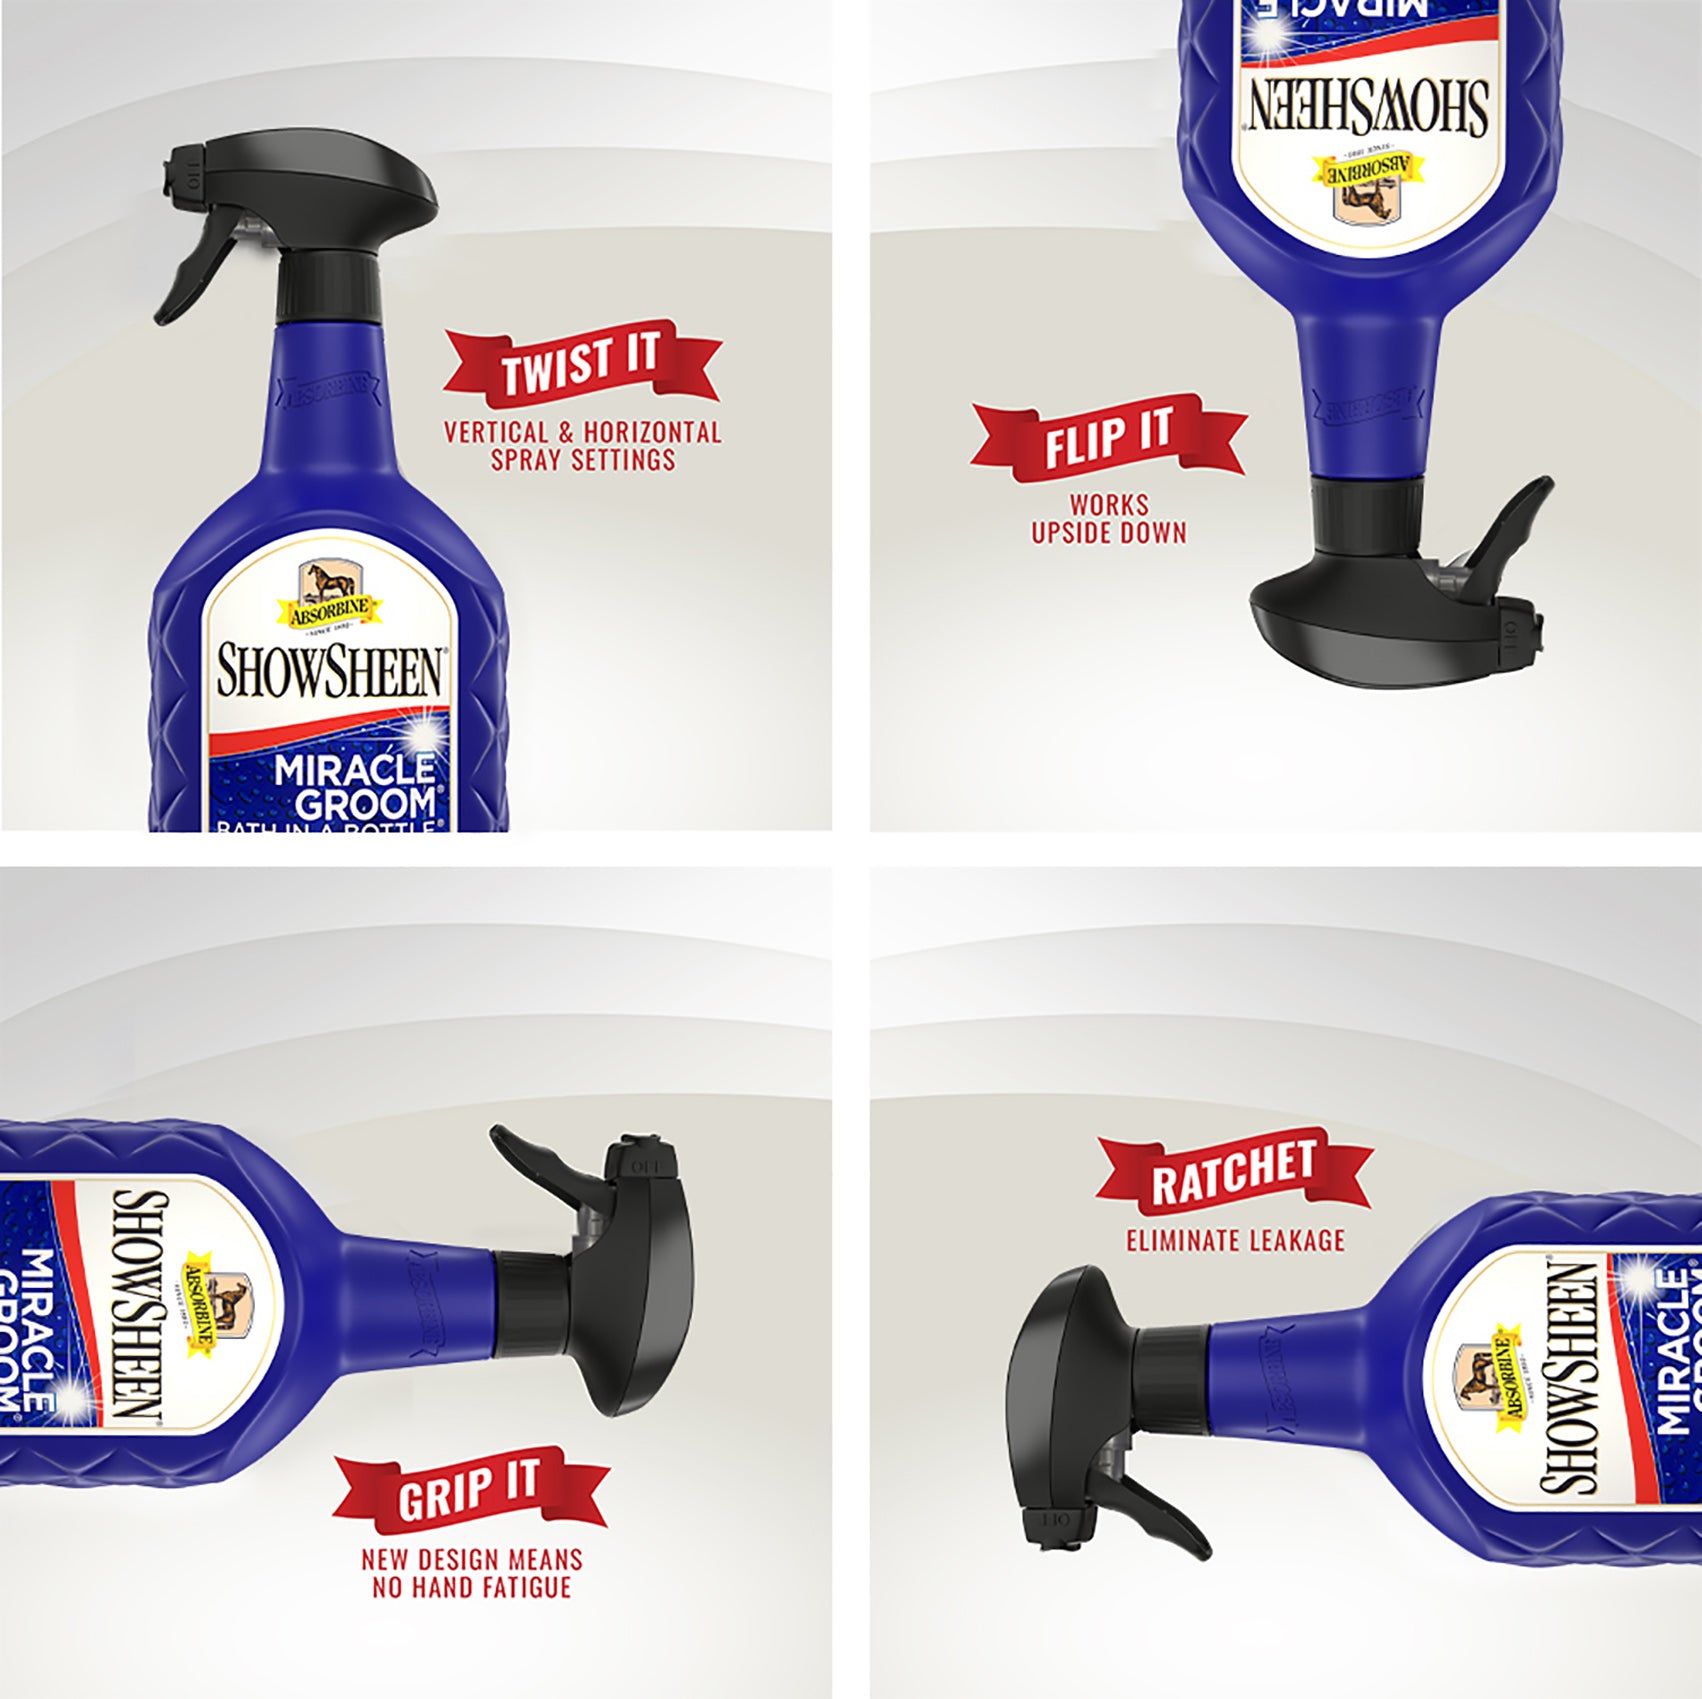 Showsheen Miracle Groom Bath in a Bottle sprayer works in all directions.  Twist it vertical and horizontal spray settings.  Flip it, works upsidown.  Grip it, new design means no hand fatigue.  Ratchet, eliminate leakage.